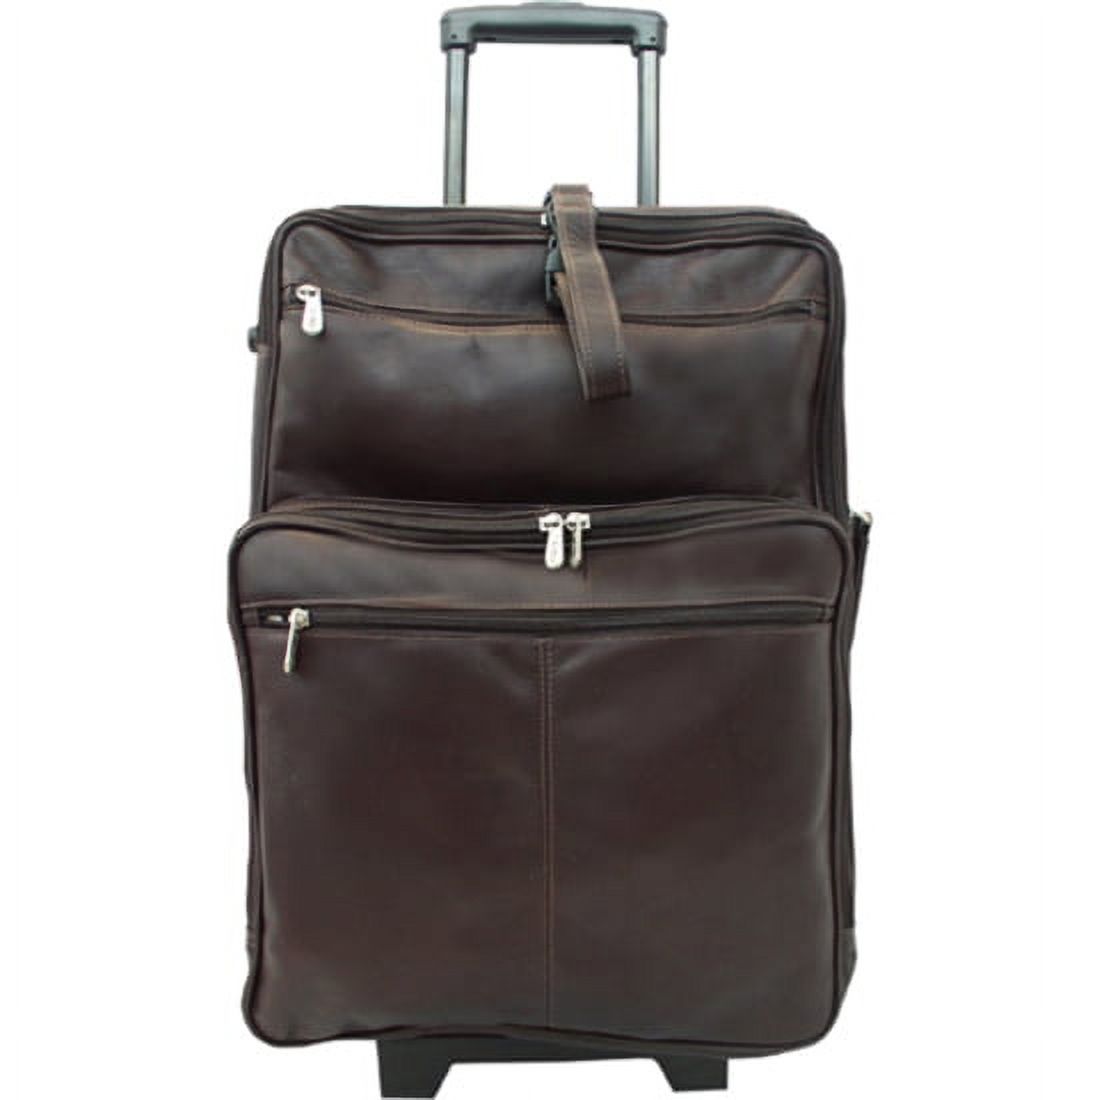 Piel Leather 22in Wheeled Traveler - image 1 of 3